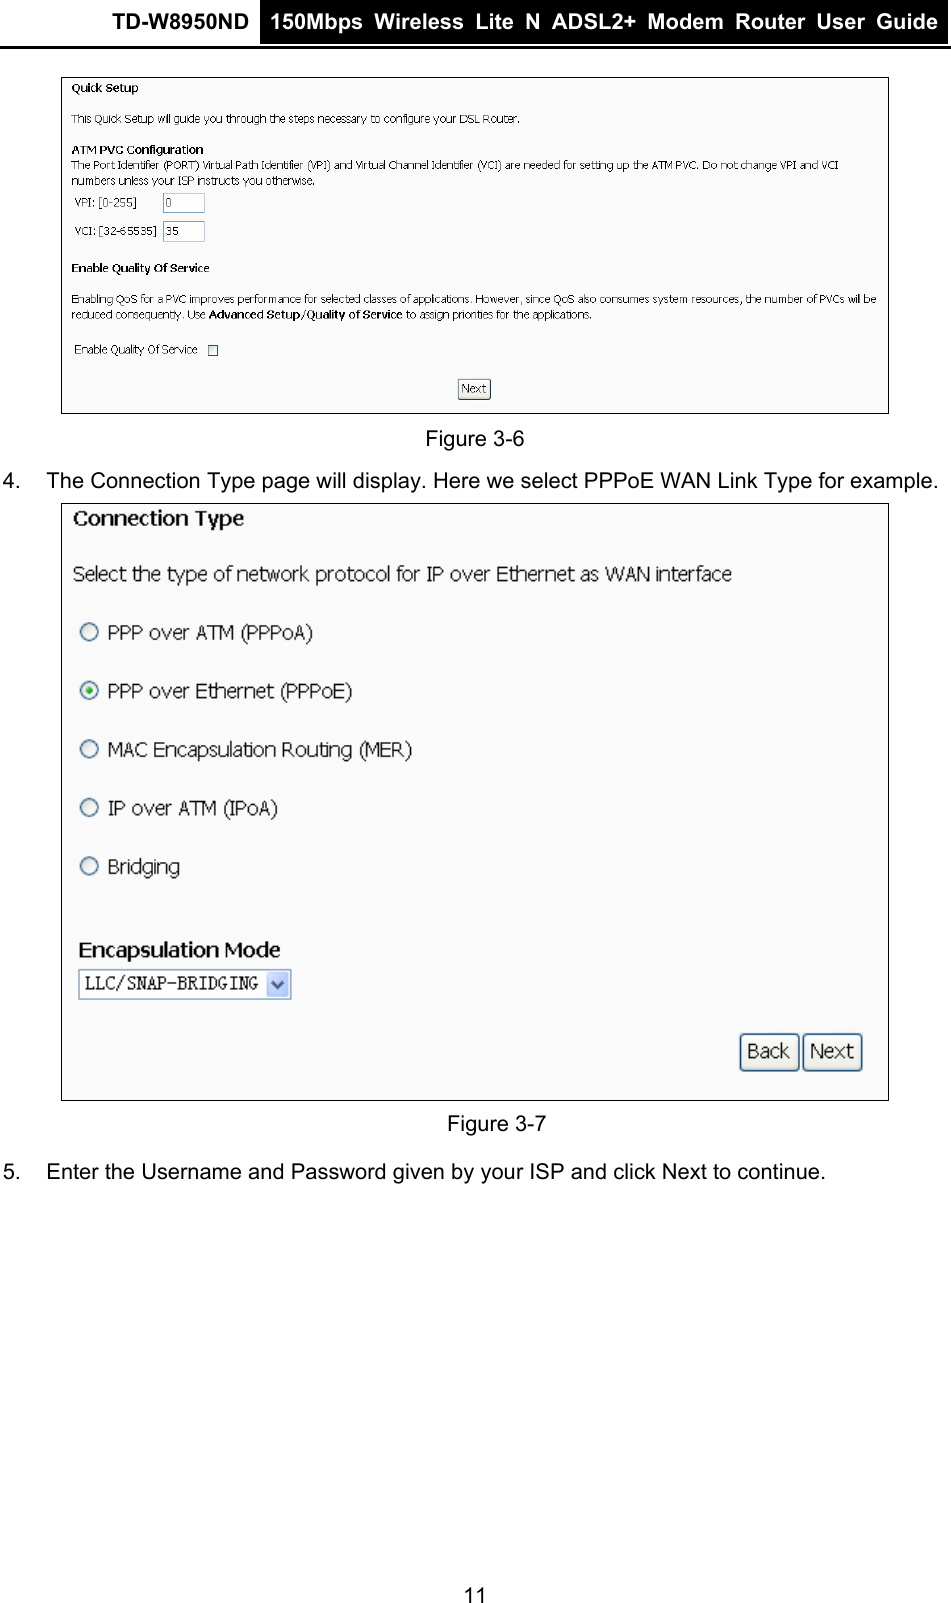 TD-W8950ND  150Mbps Wireless Lite N ADSL2+ Modem Router User Guide   Figure 3-6 4.  The Connection Type page will display. Here we select PPPoE WAN Link Type for example.  Figure 3-7 5.  Enter the Username and Password given by your ISP and click Next to continue. 11 